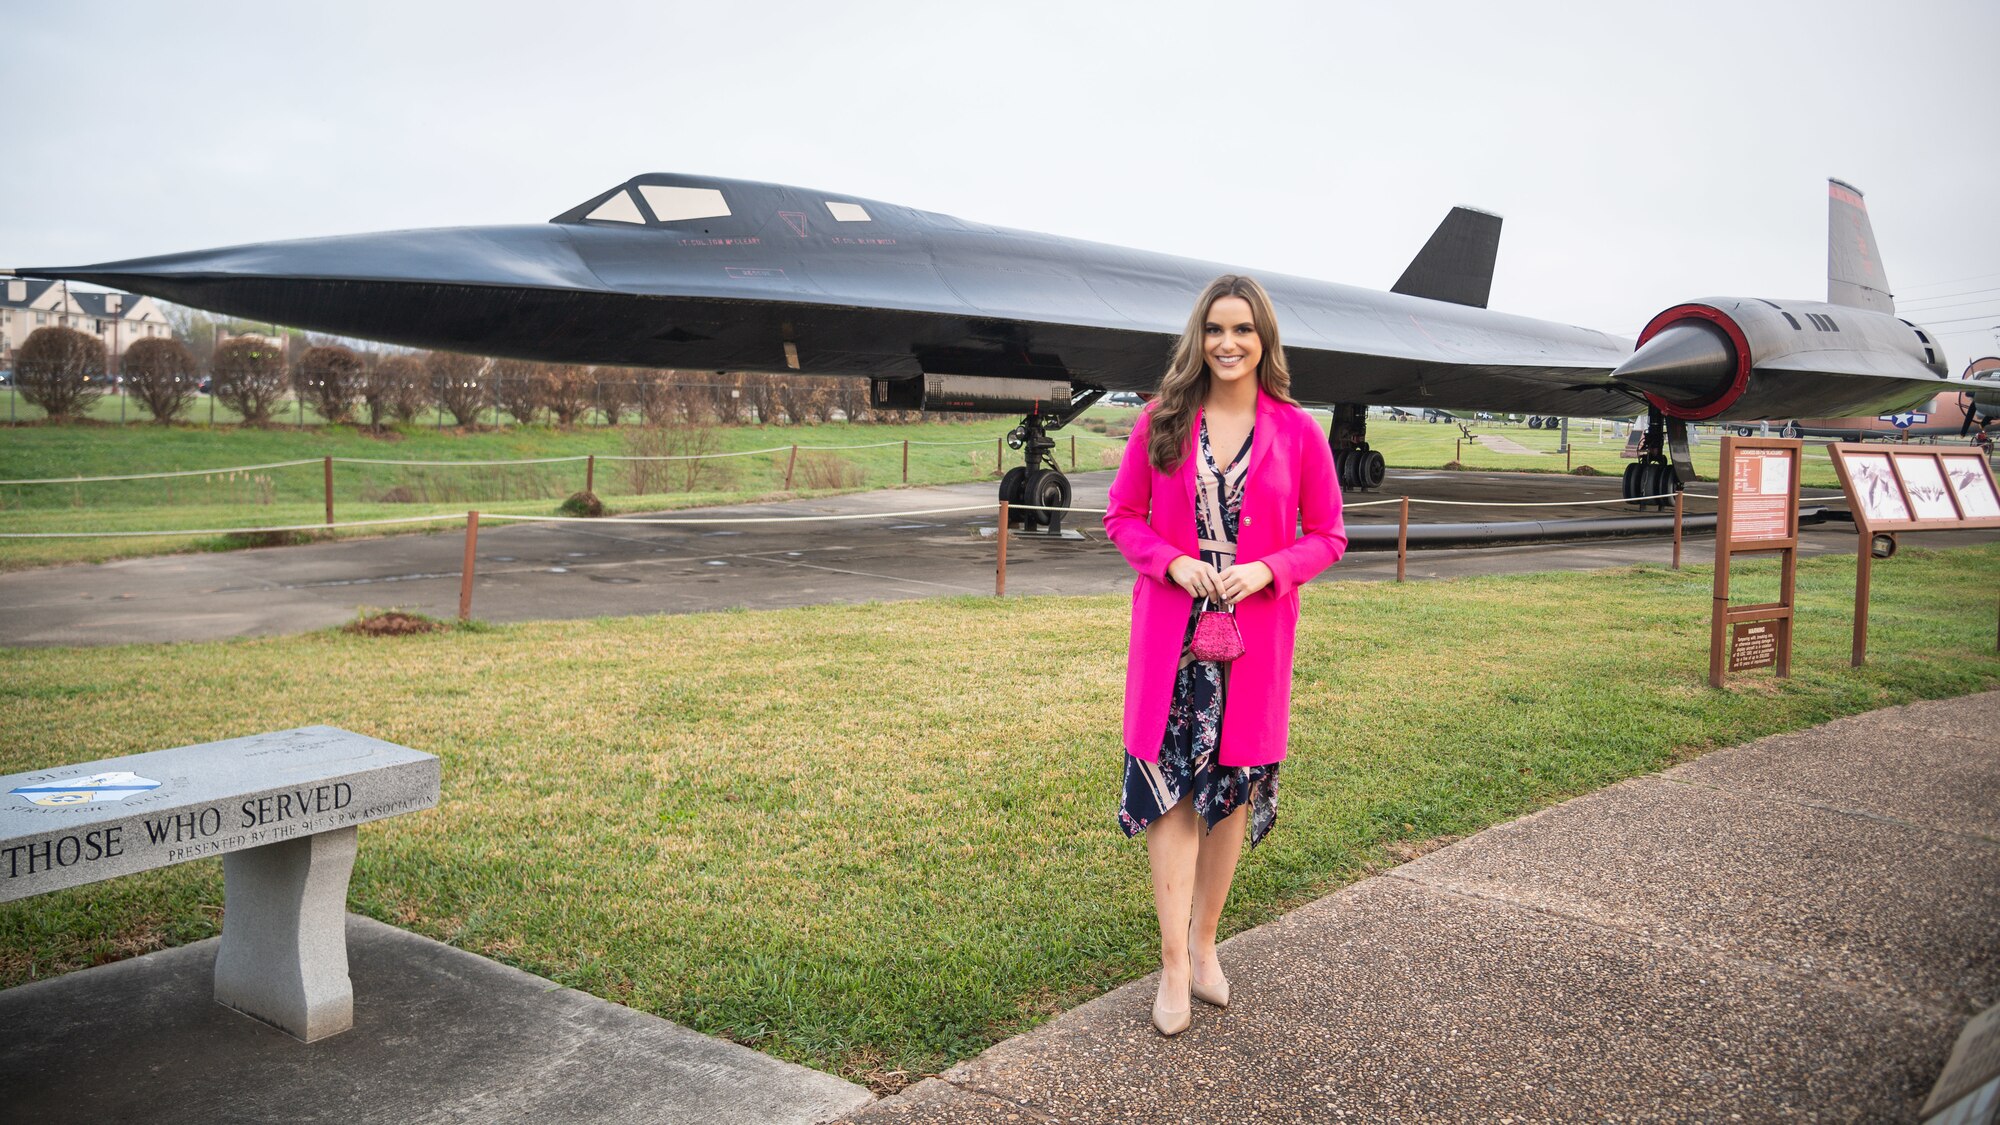 Camille Schrier, Miss America 2020, poses for a photo in front of an SR-71 Blackbird static display at the Global Power Museum at Barksdale Air Force Base, Louisiana, March 24, 2021.